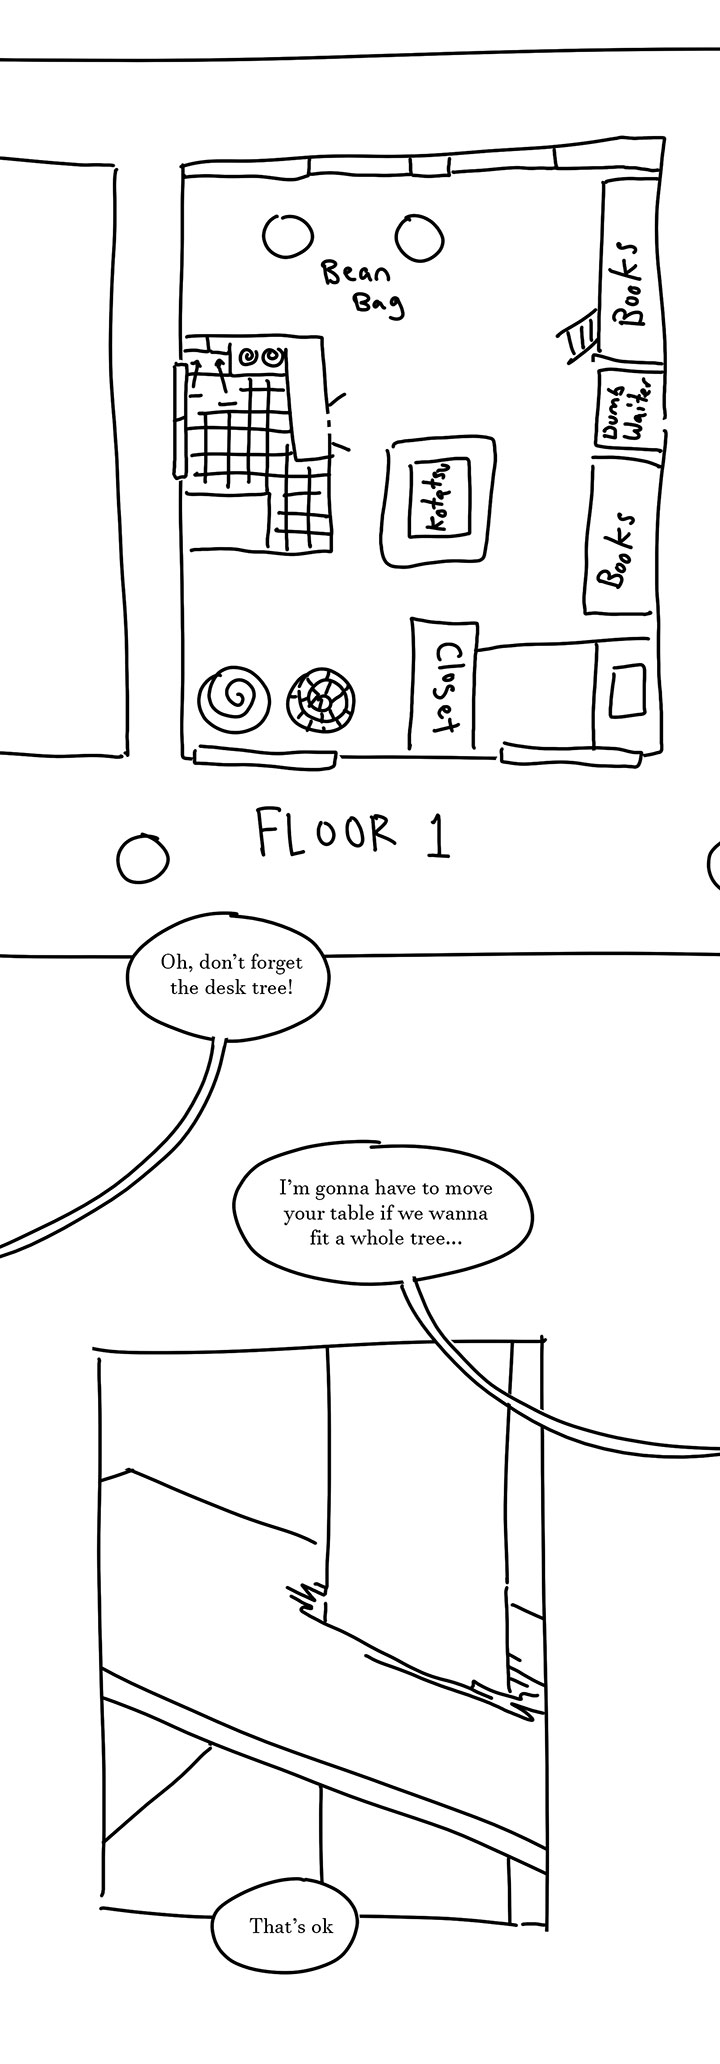 Panel 5: Close up of the paper with hole punches in it. There is now a rectangle drawn on it labeled FLOOR 1, it's a layout of a house showing a bed, a closet, bookshelves, beanbags, a disembodied kitchen...
Speech bubble pointing to the left off the page, it says, "Oh, don't forget the desk tree!"
Speech bubble pointing to the right: I'm gonna have to move your table if we wanna fit a whole tree..."
Panel 6: Close up of a tree sticking through a table top. The wood is splintered slightly.
Speech bubble: That's ok